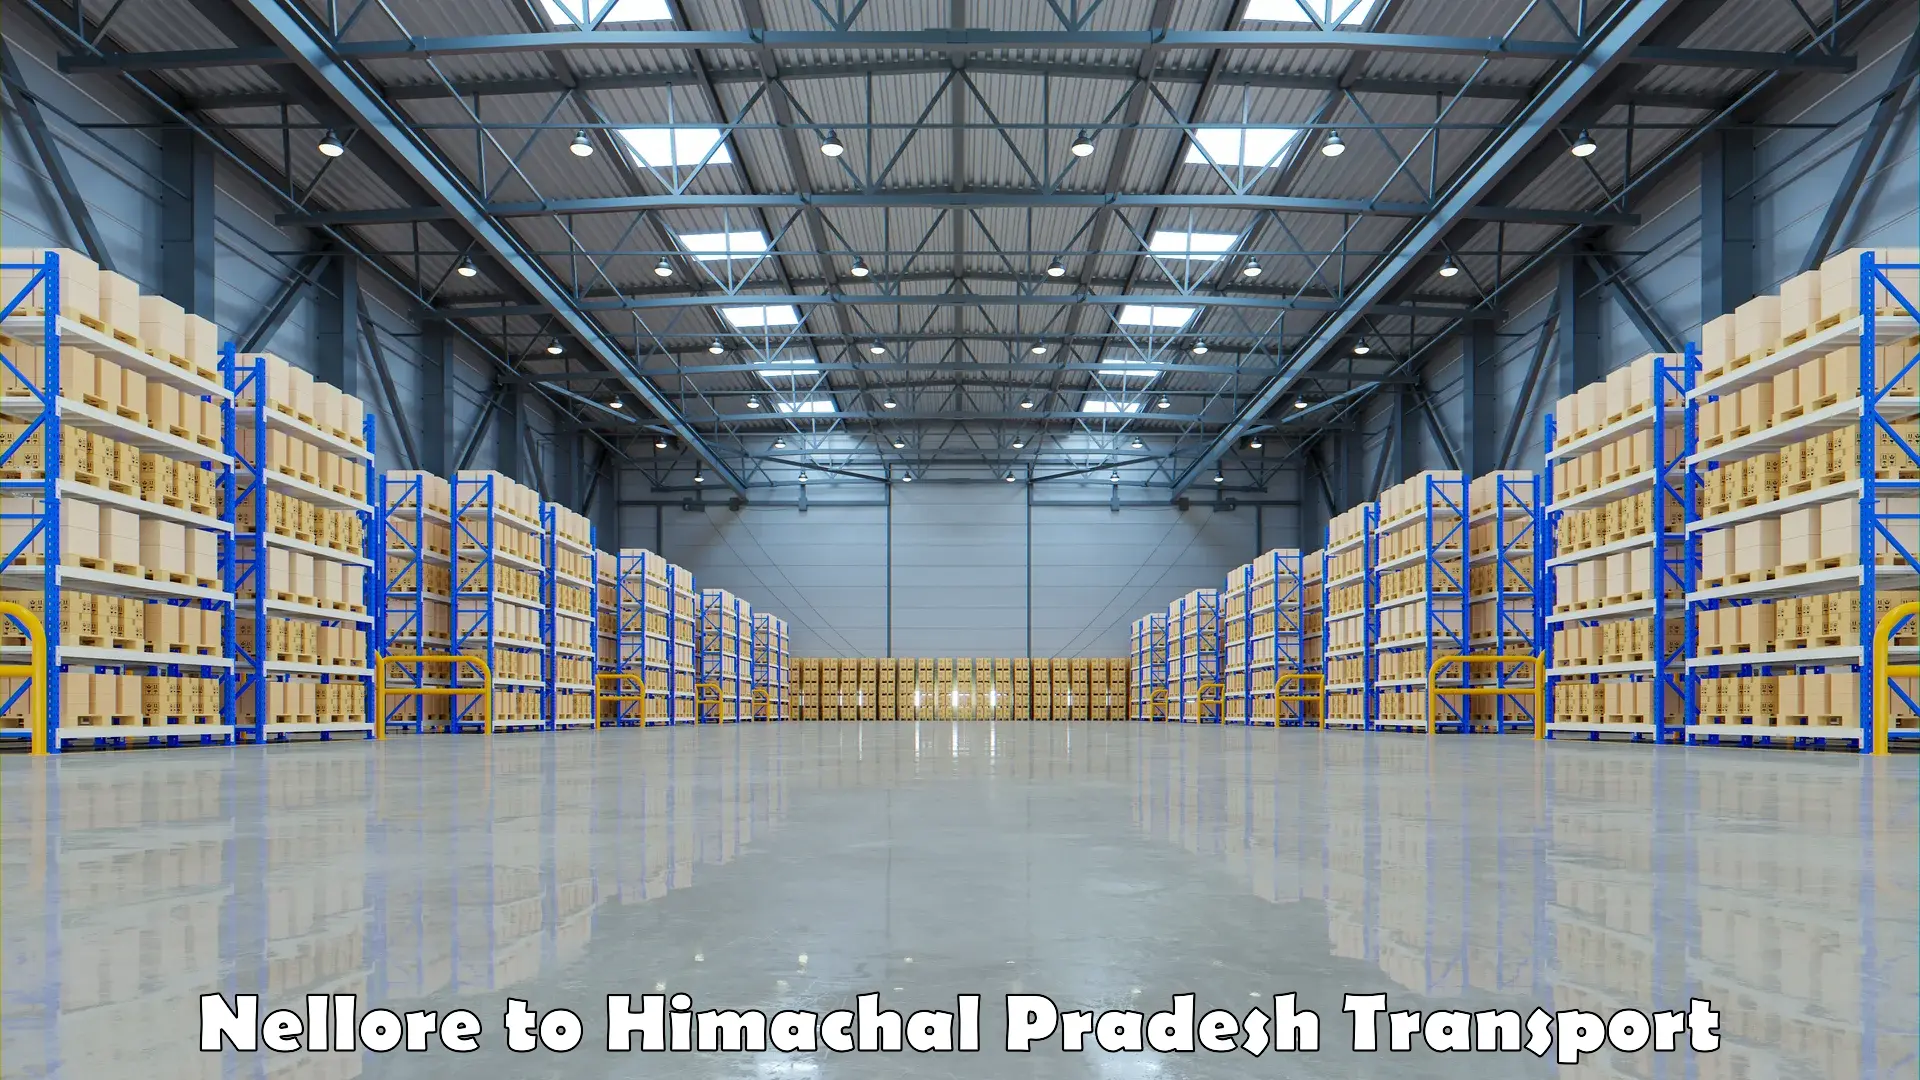 Transport bike from one state to another Nellore to Himachal Pradesh